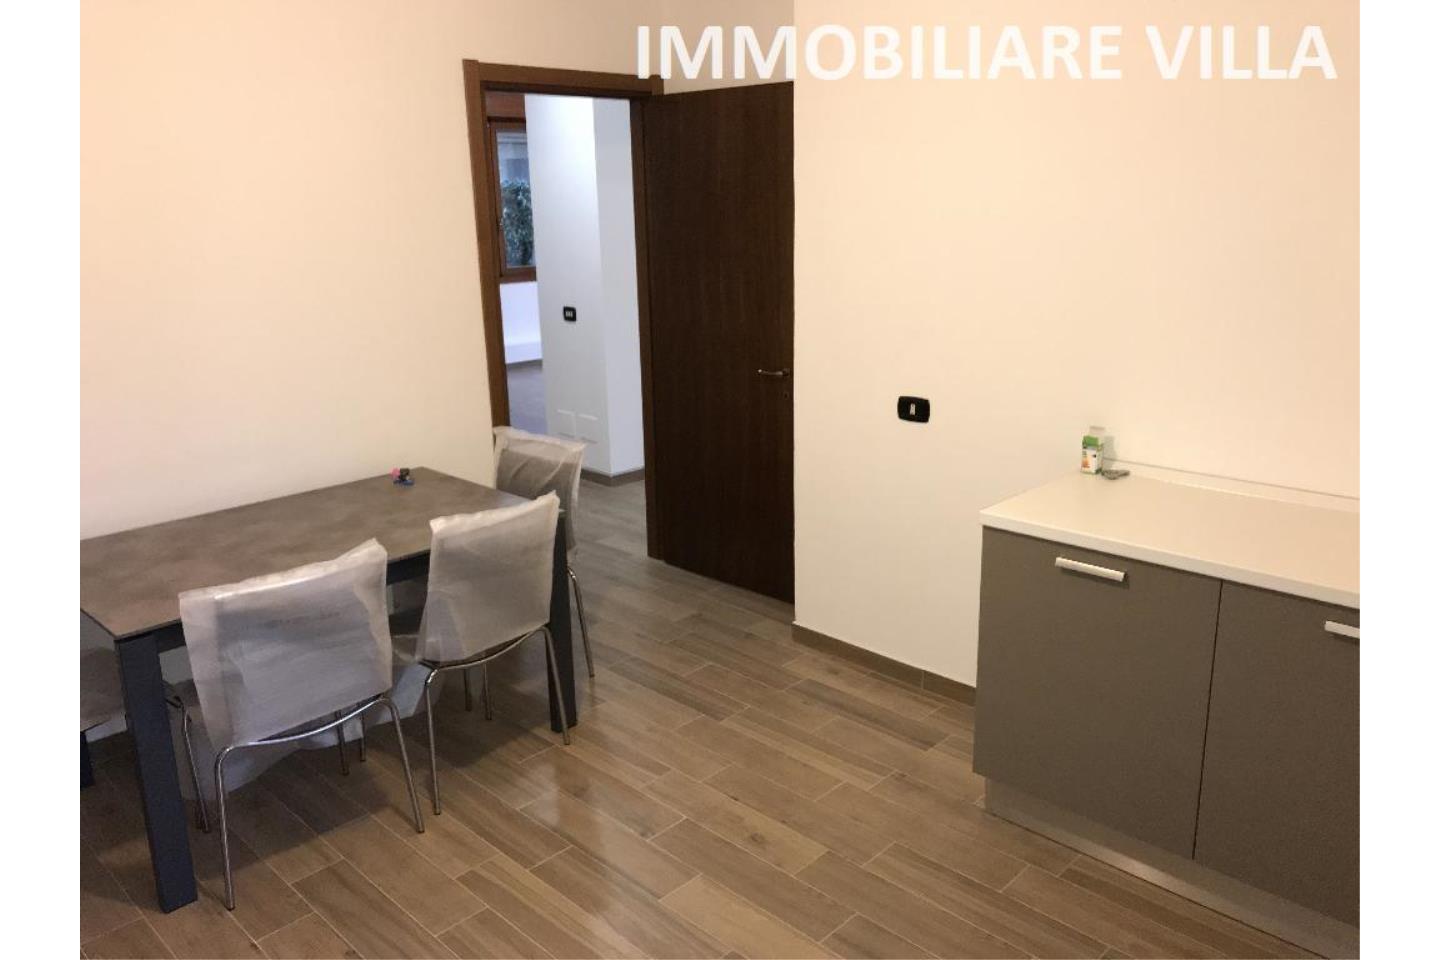 Villa in Affitto Arese